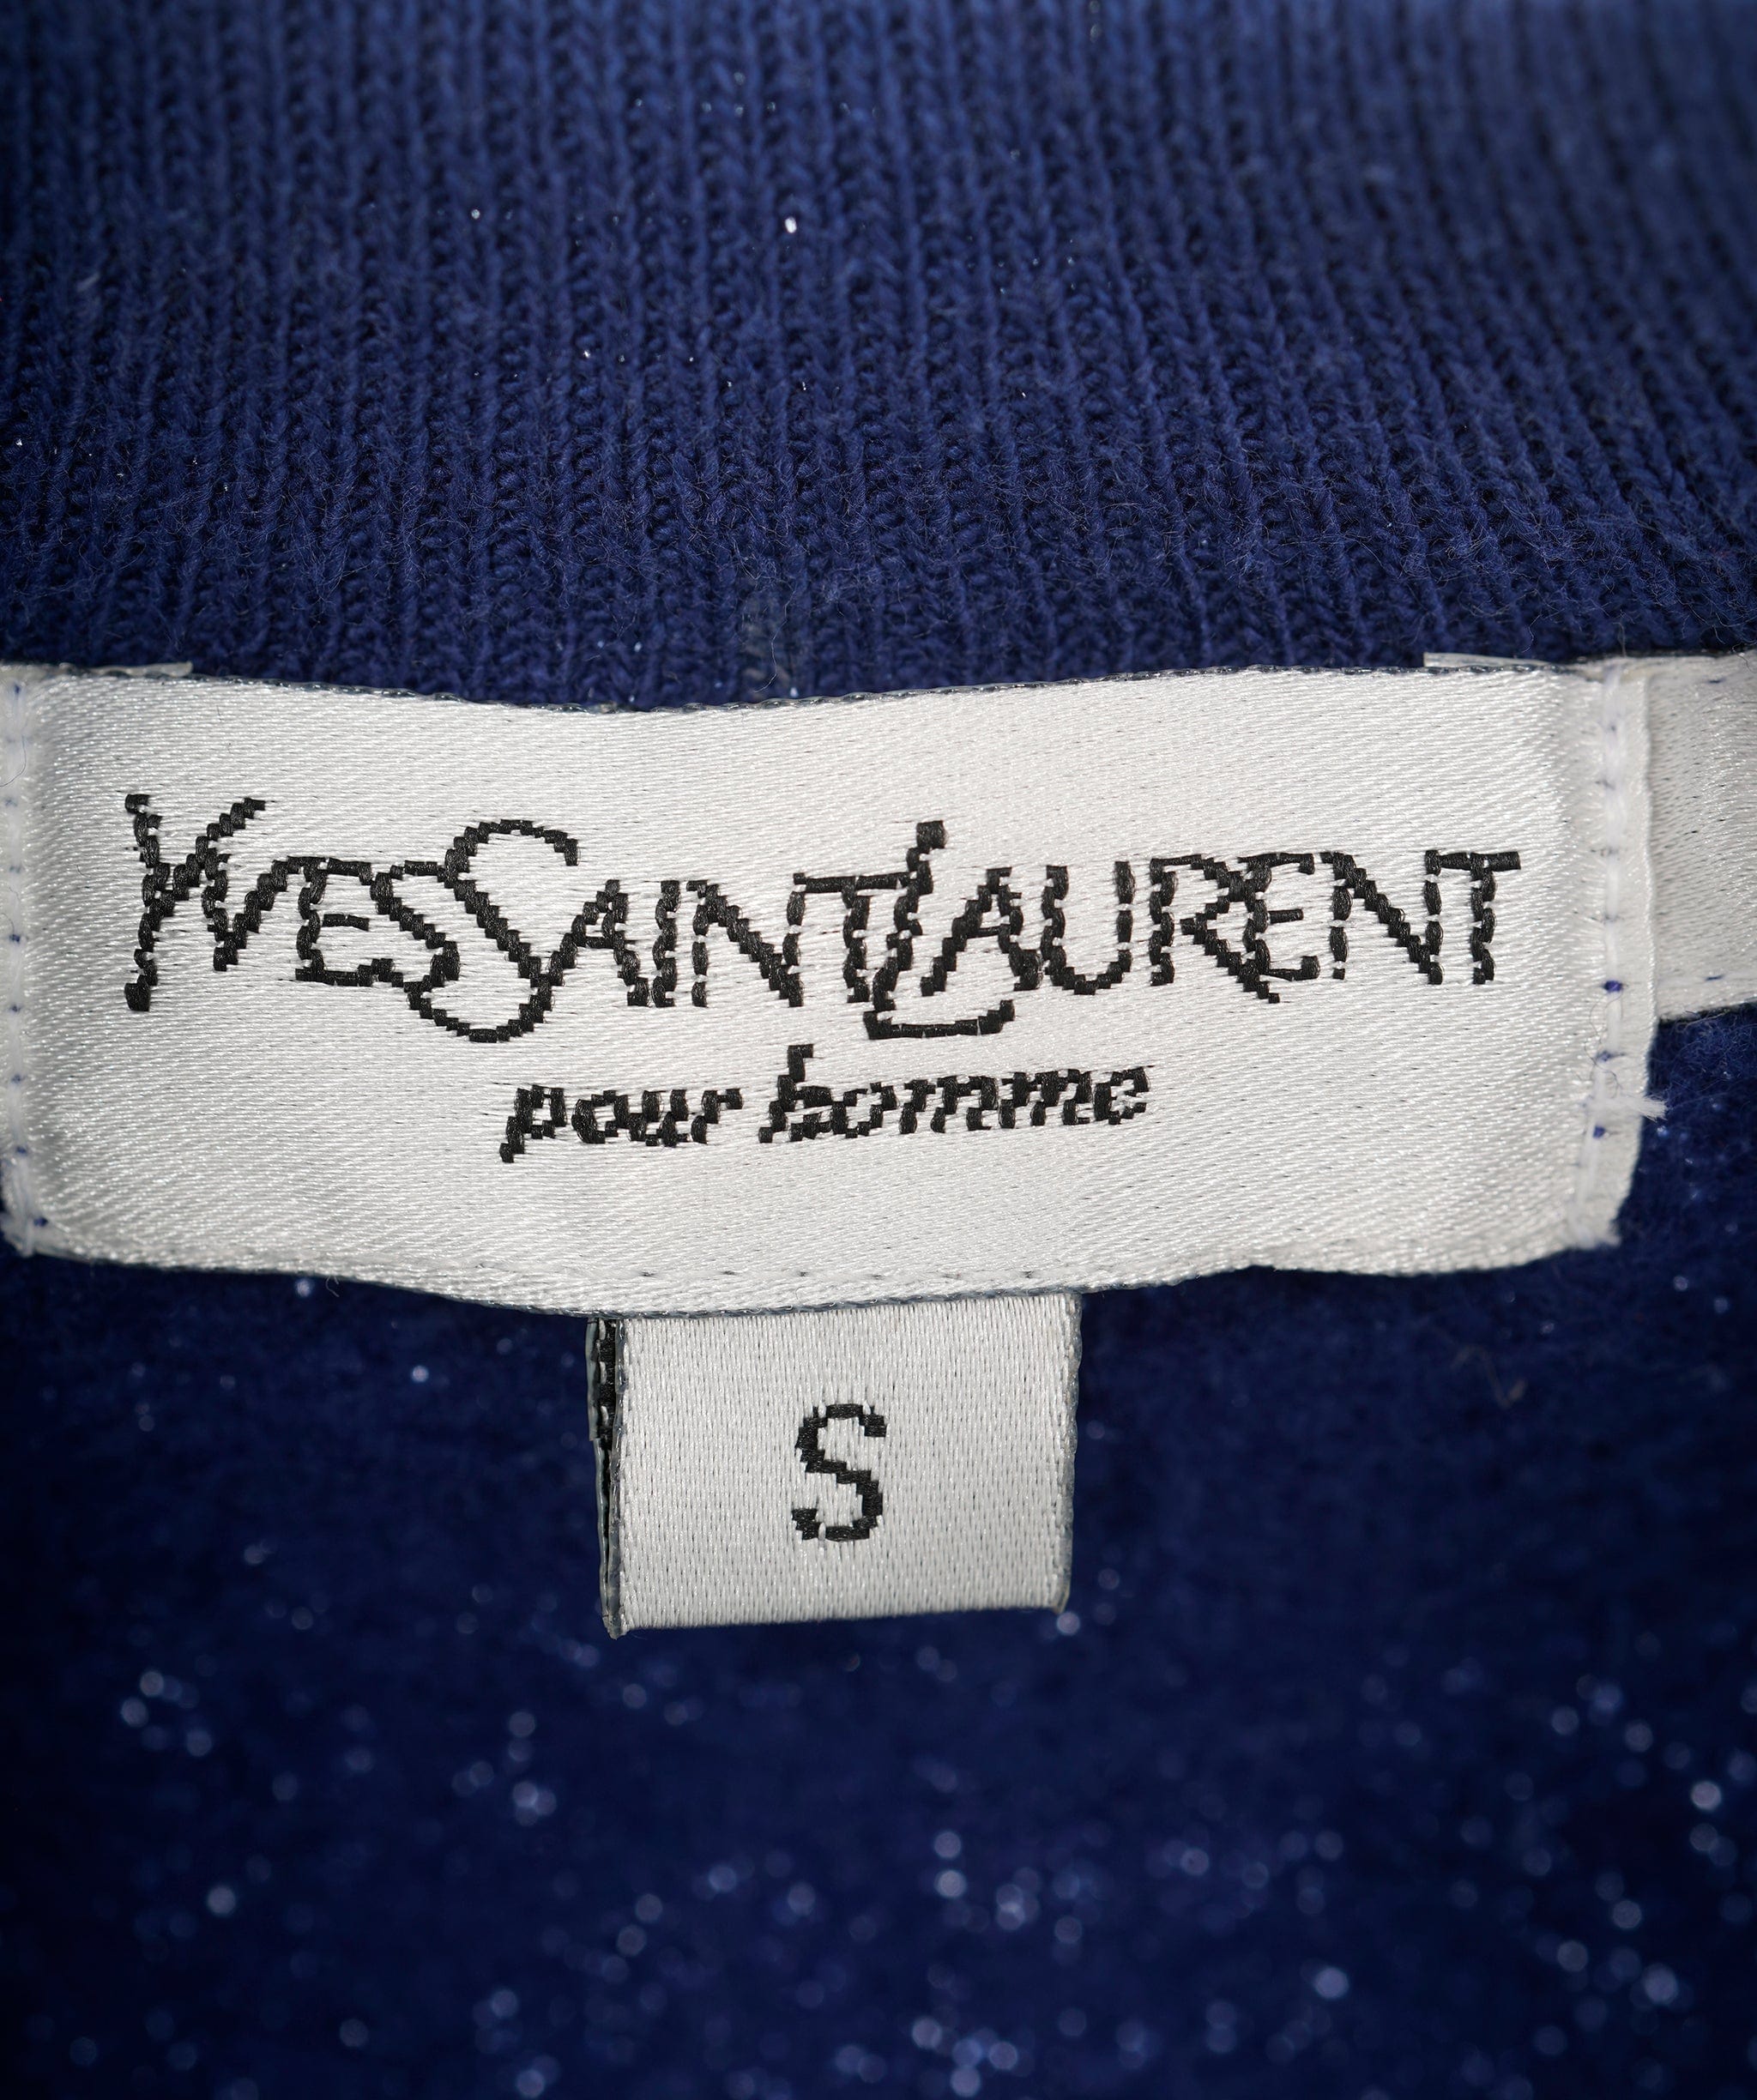 Yves Saint Laurent YSL Navy and Red Crewneck Jumper  ALL0603